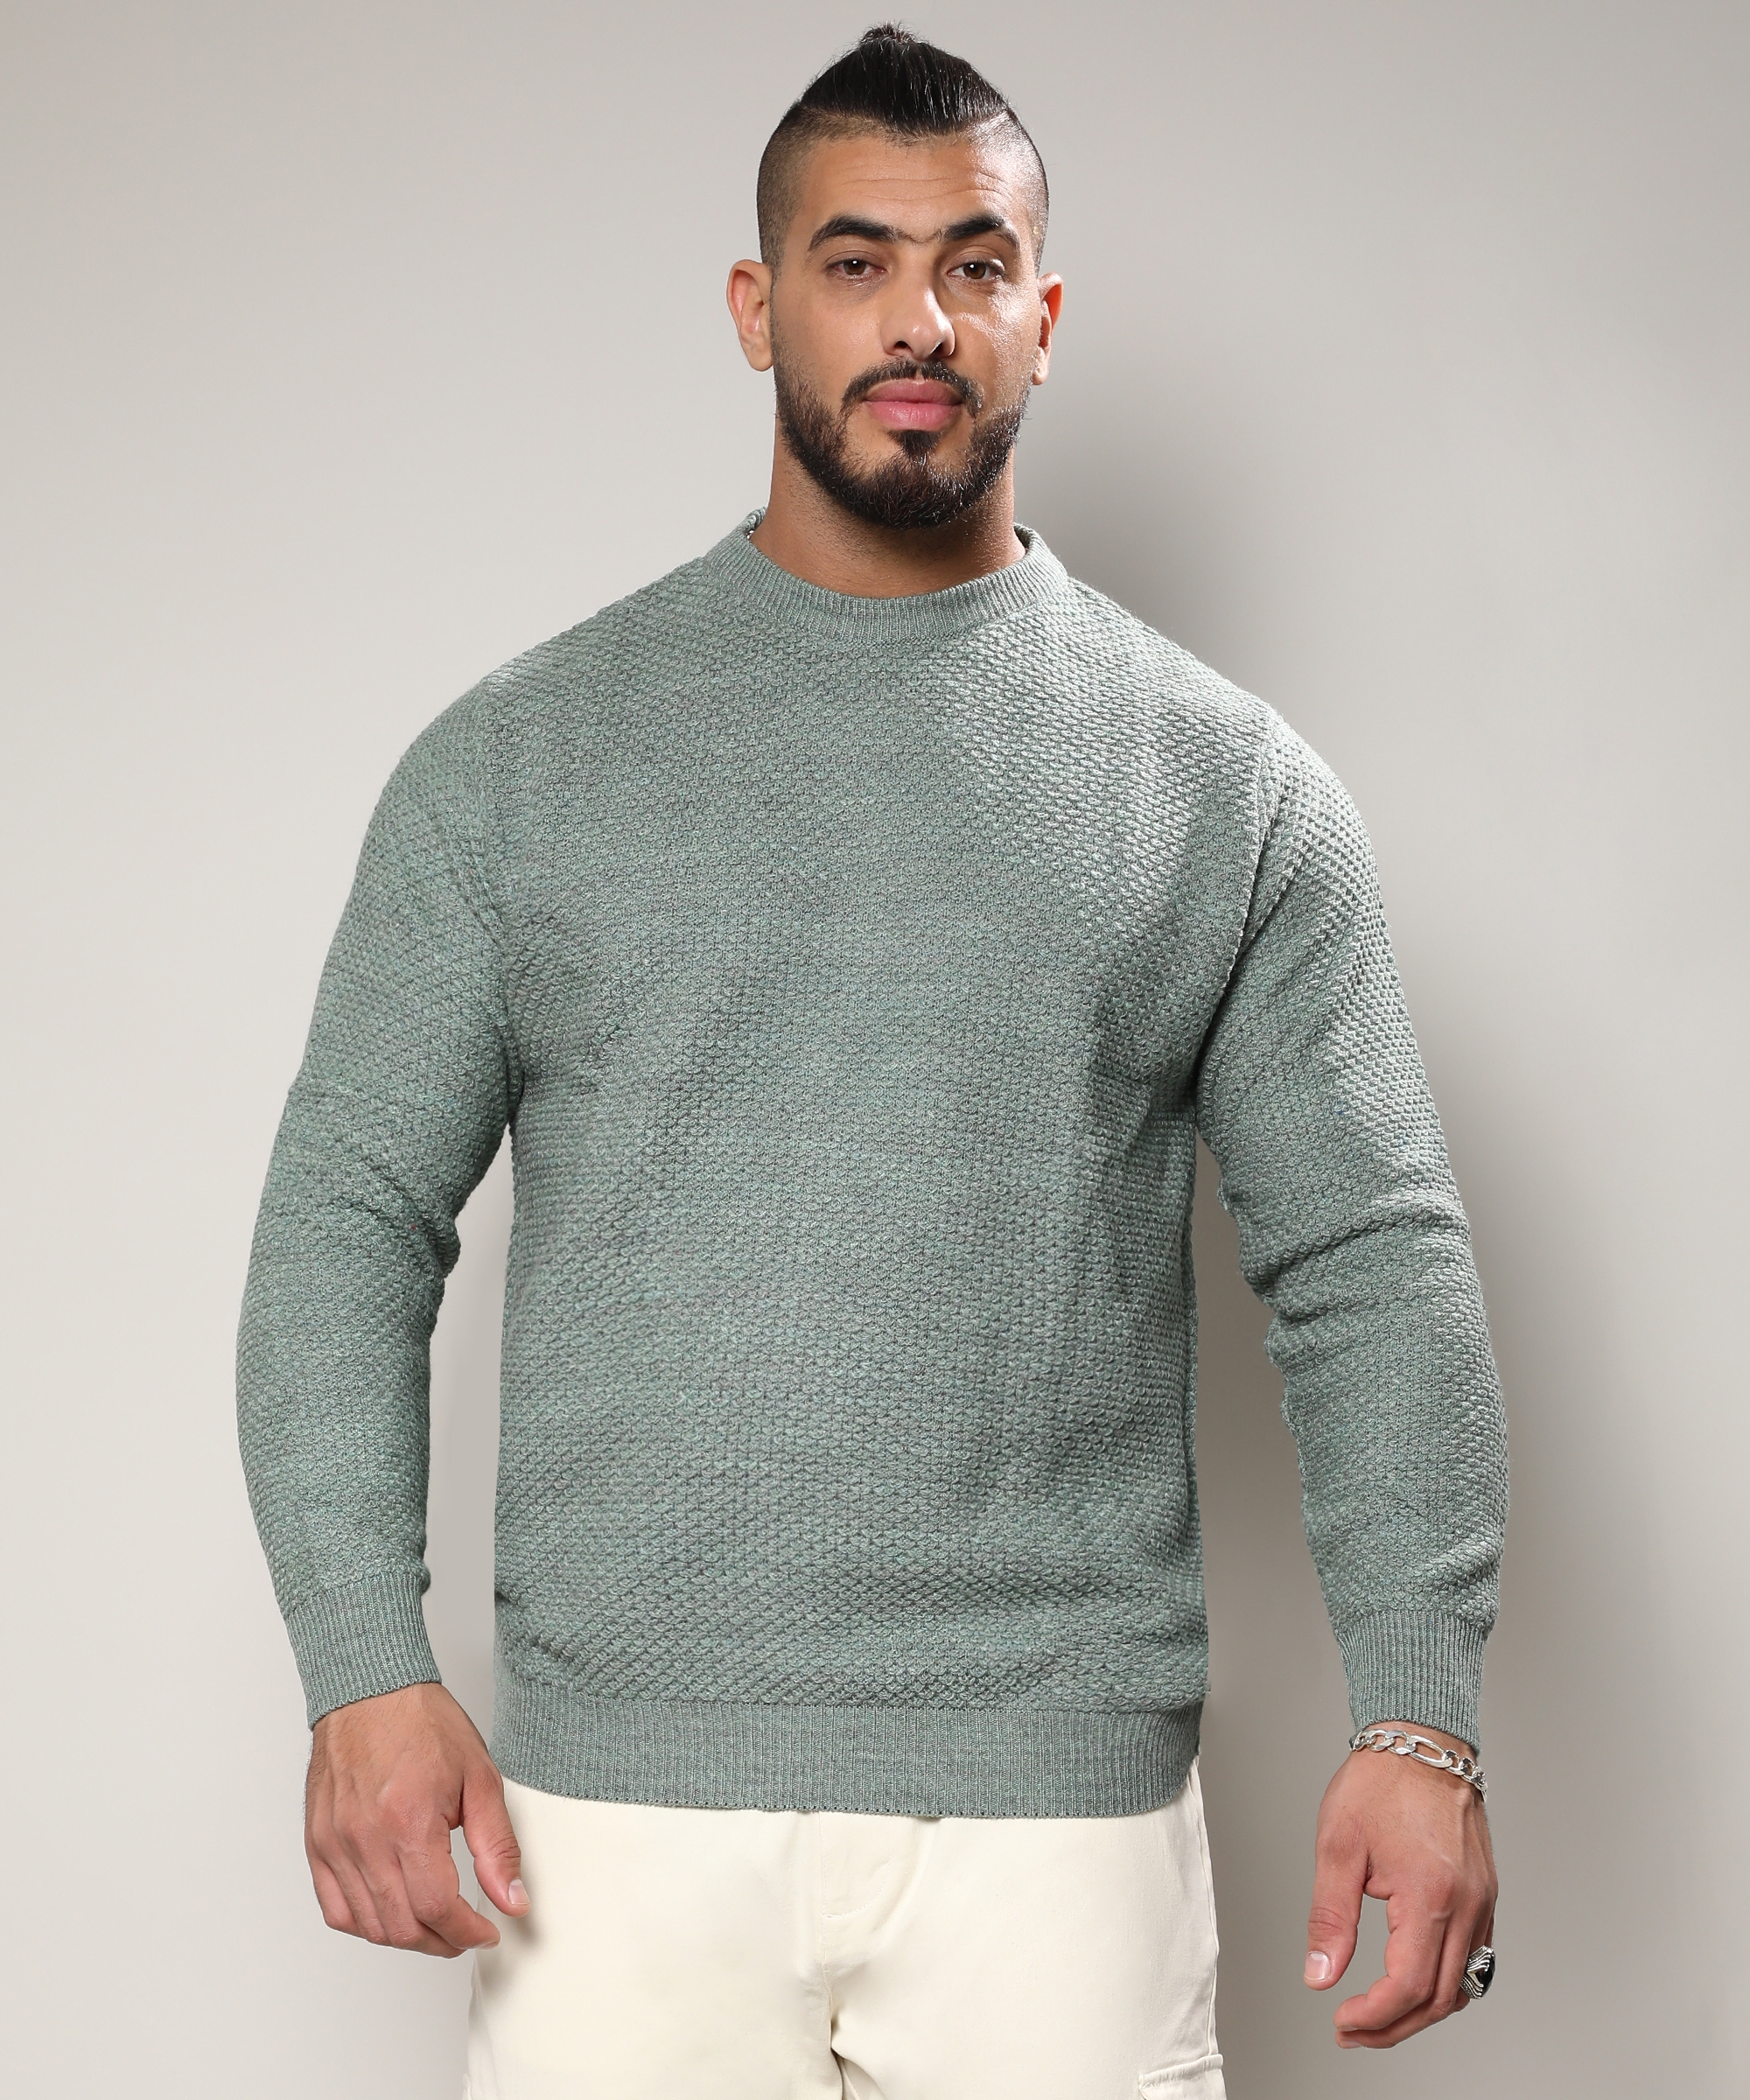 Men's Olive Green Textured Knit Pullover Sweater